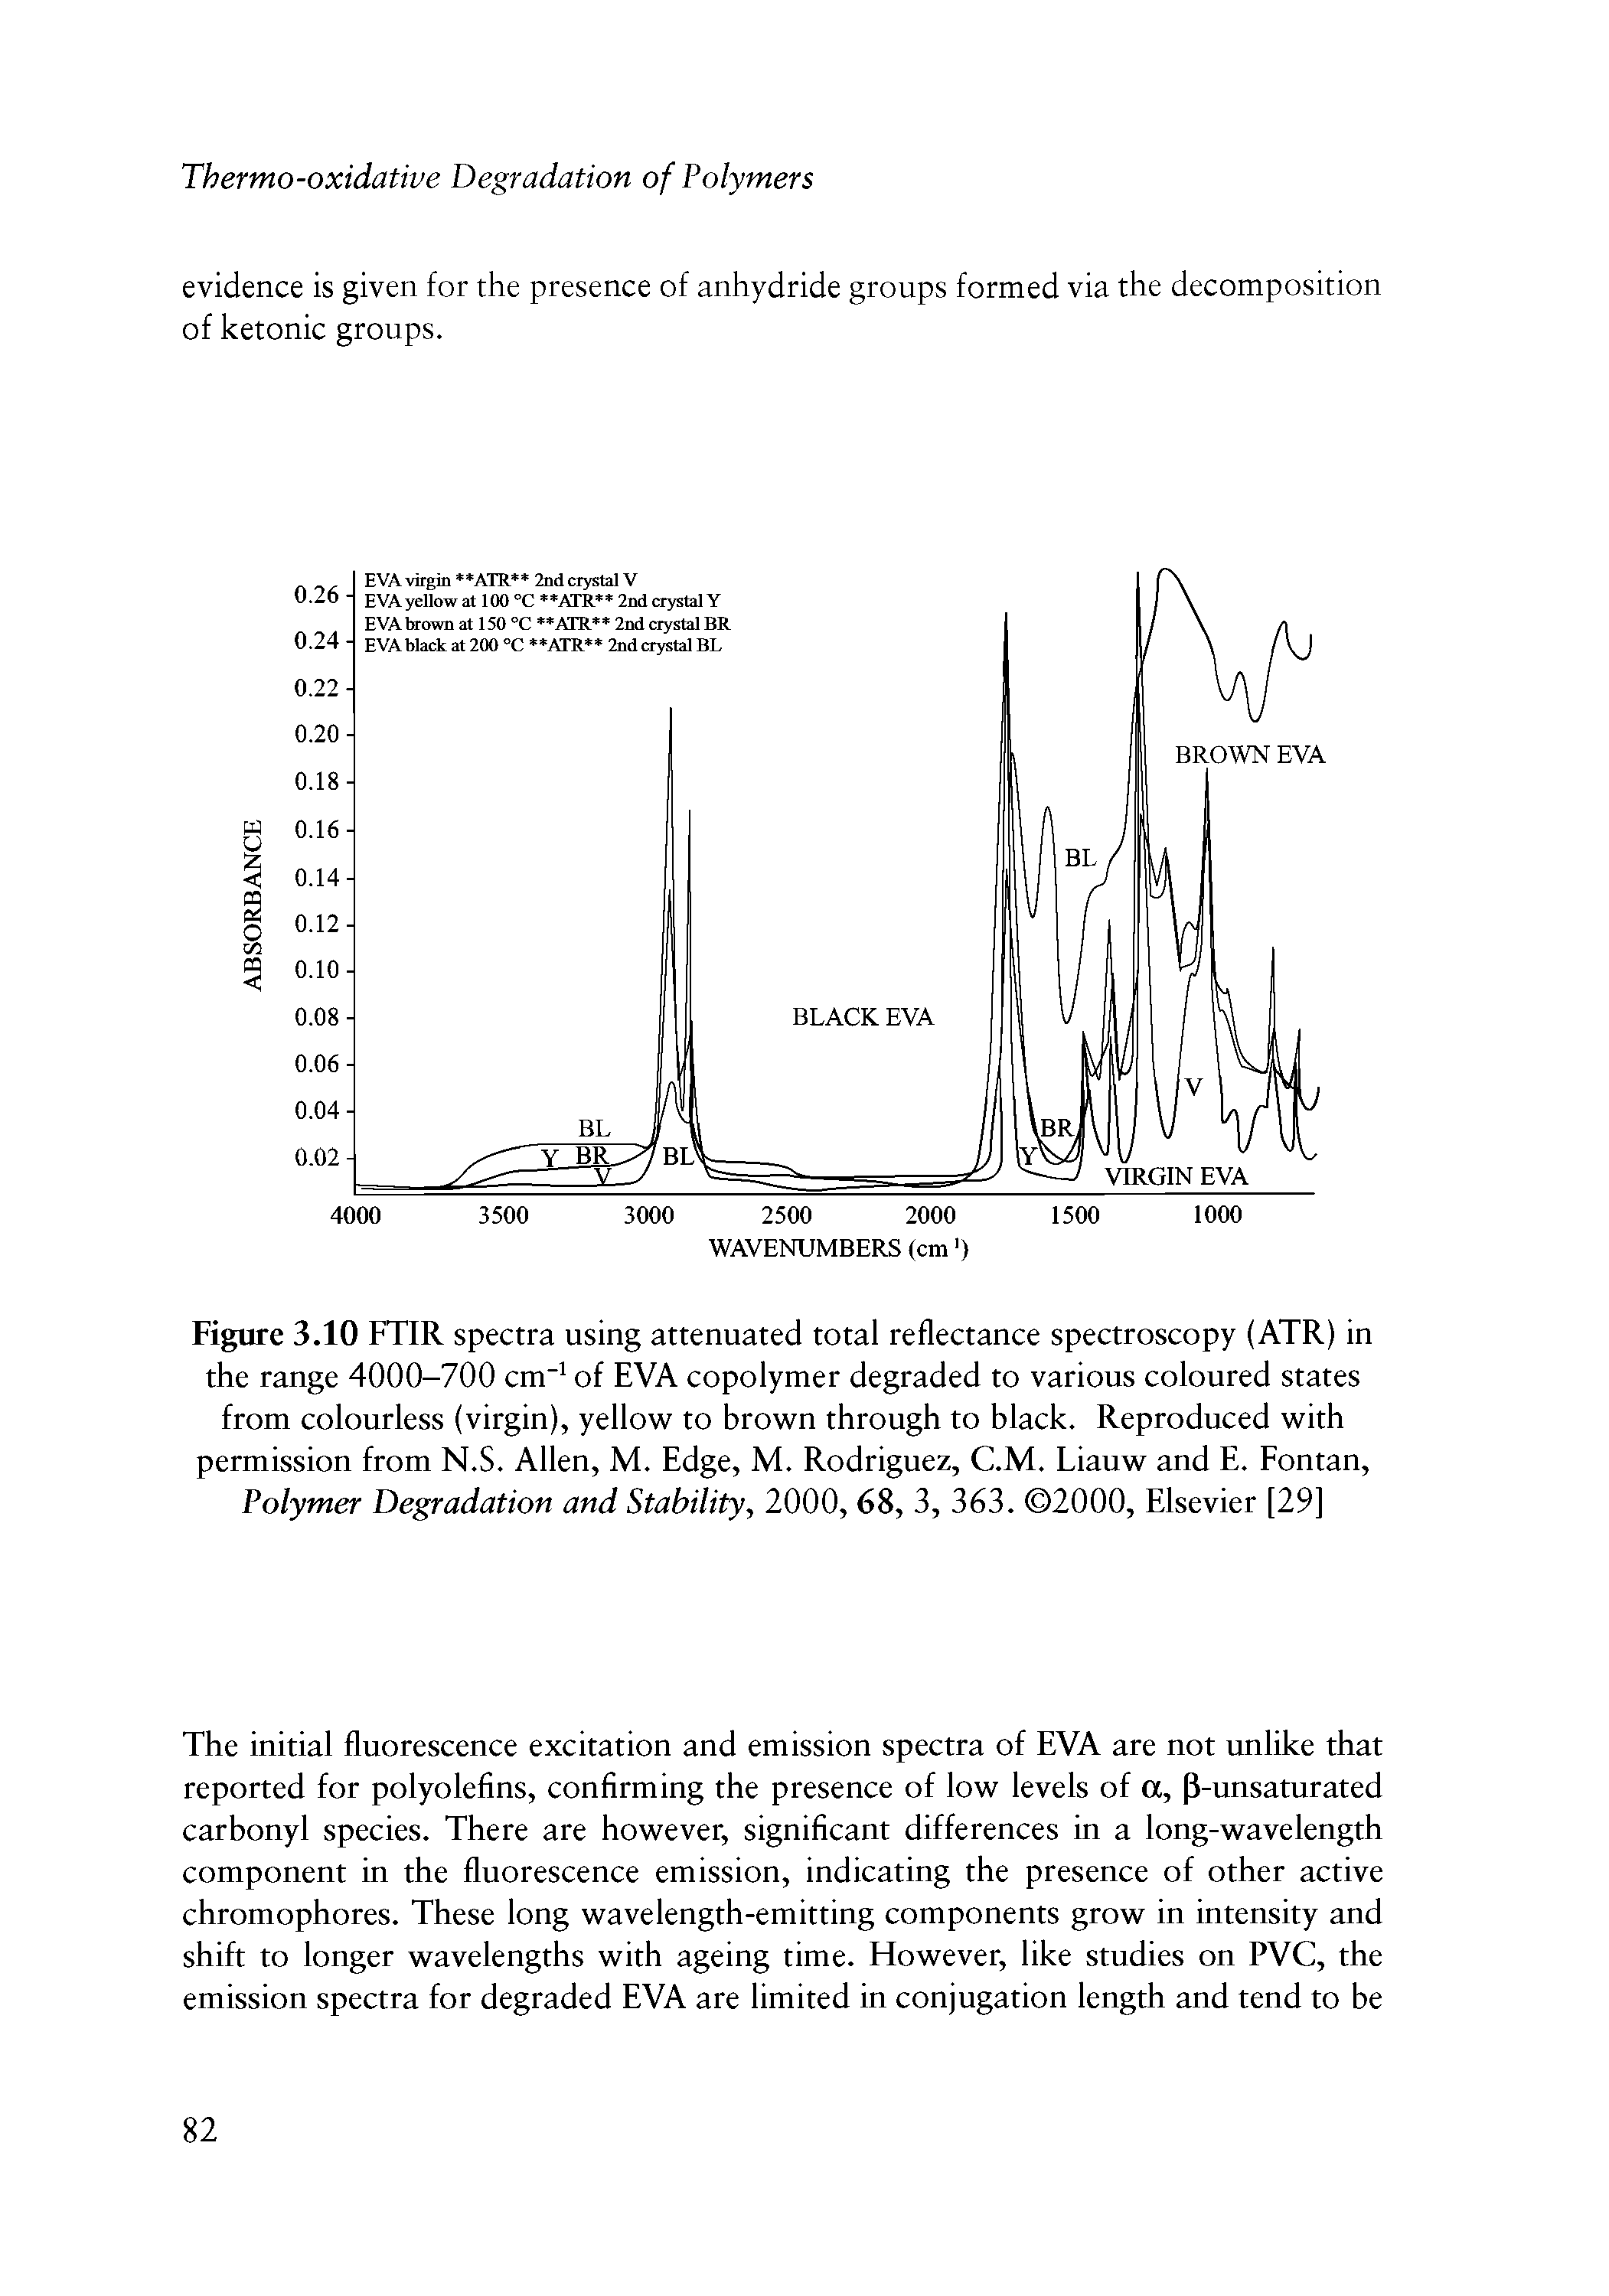 Figure 3.10 FTIR spectra using attenuated total reflectance spectroscopy (ATR) in the range 4000-700 cm" of EVA copolymer degraded to various coloured states from colourless (virgin), yellow to brown through to black. Reproduced with permission from N.S. Allen, M. Edge, M. Rodriguez, C.M. Liauw and E. Fontan, Polymer Degradation and Stability, 2000,68, 3, 363. 2000, Elsevier [29]...